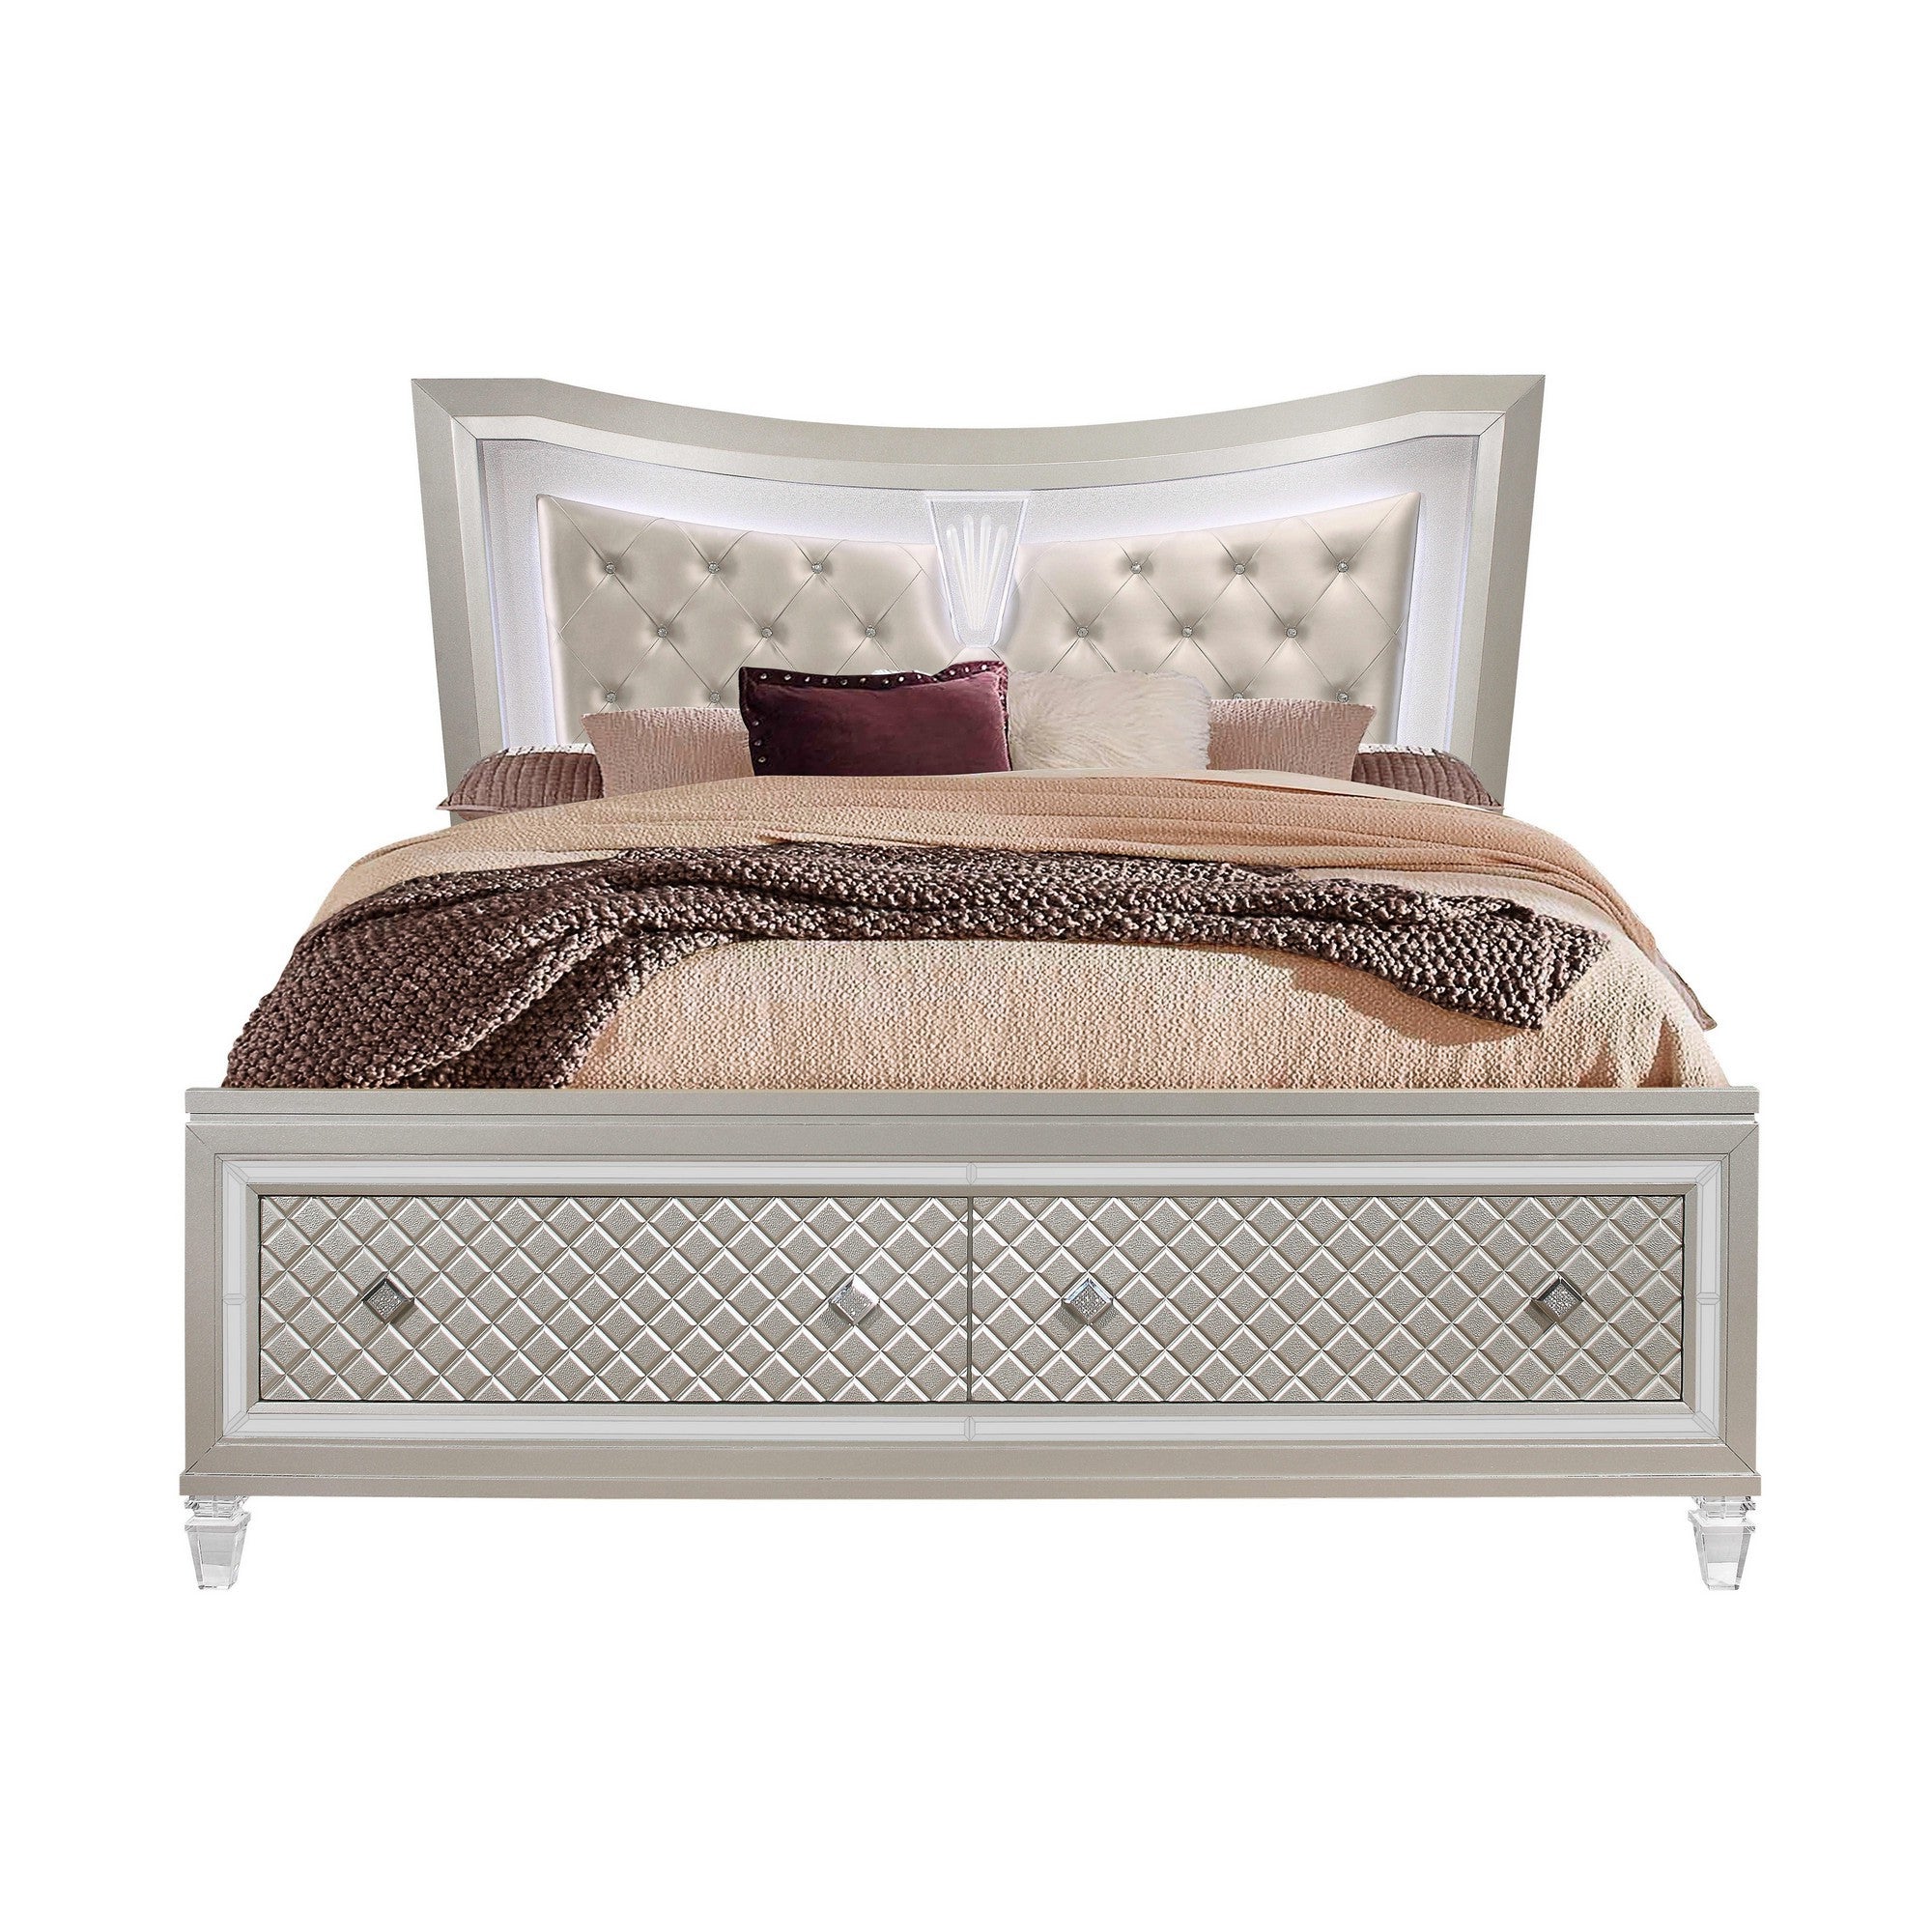 Champagne Tone Queen Bed With Padded Headboard  Led Lightning  2 Drawer